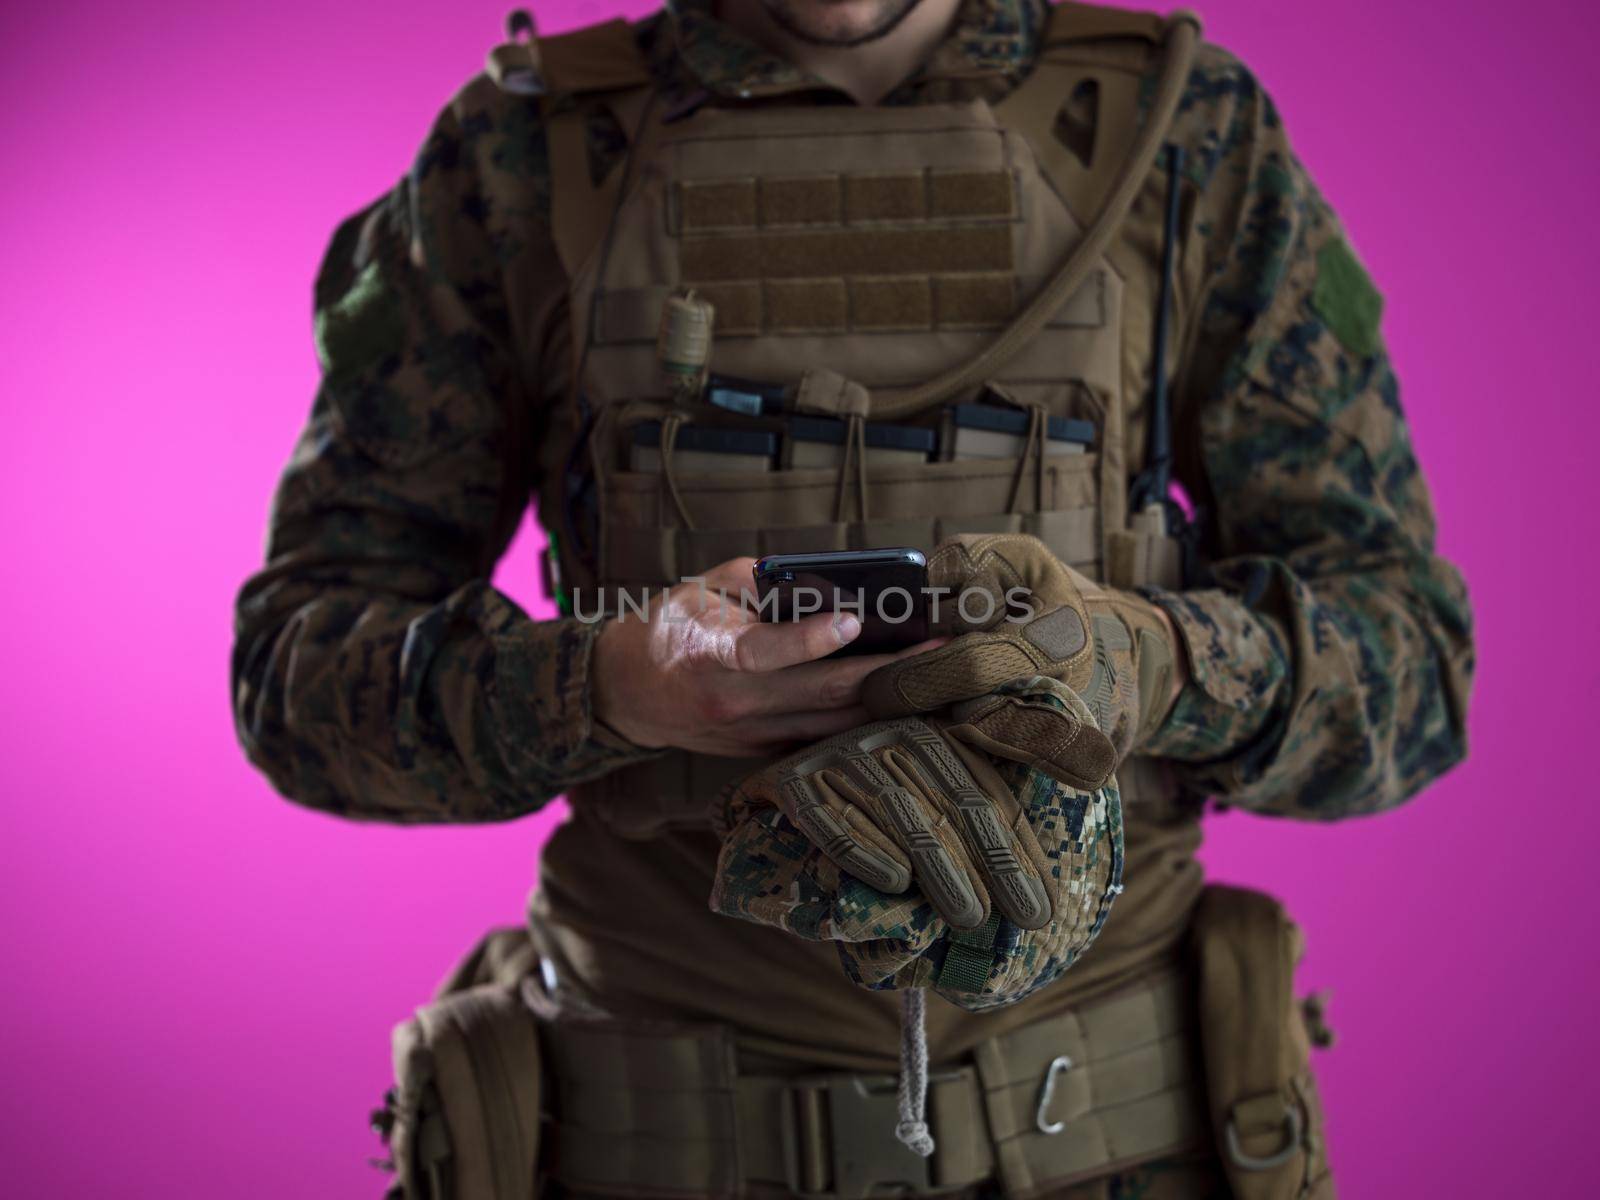 army soldier using smartphone to contact family or girlfriend communication and nostalgia concept pink background